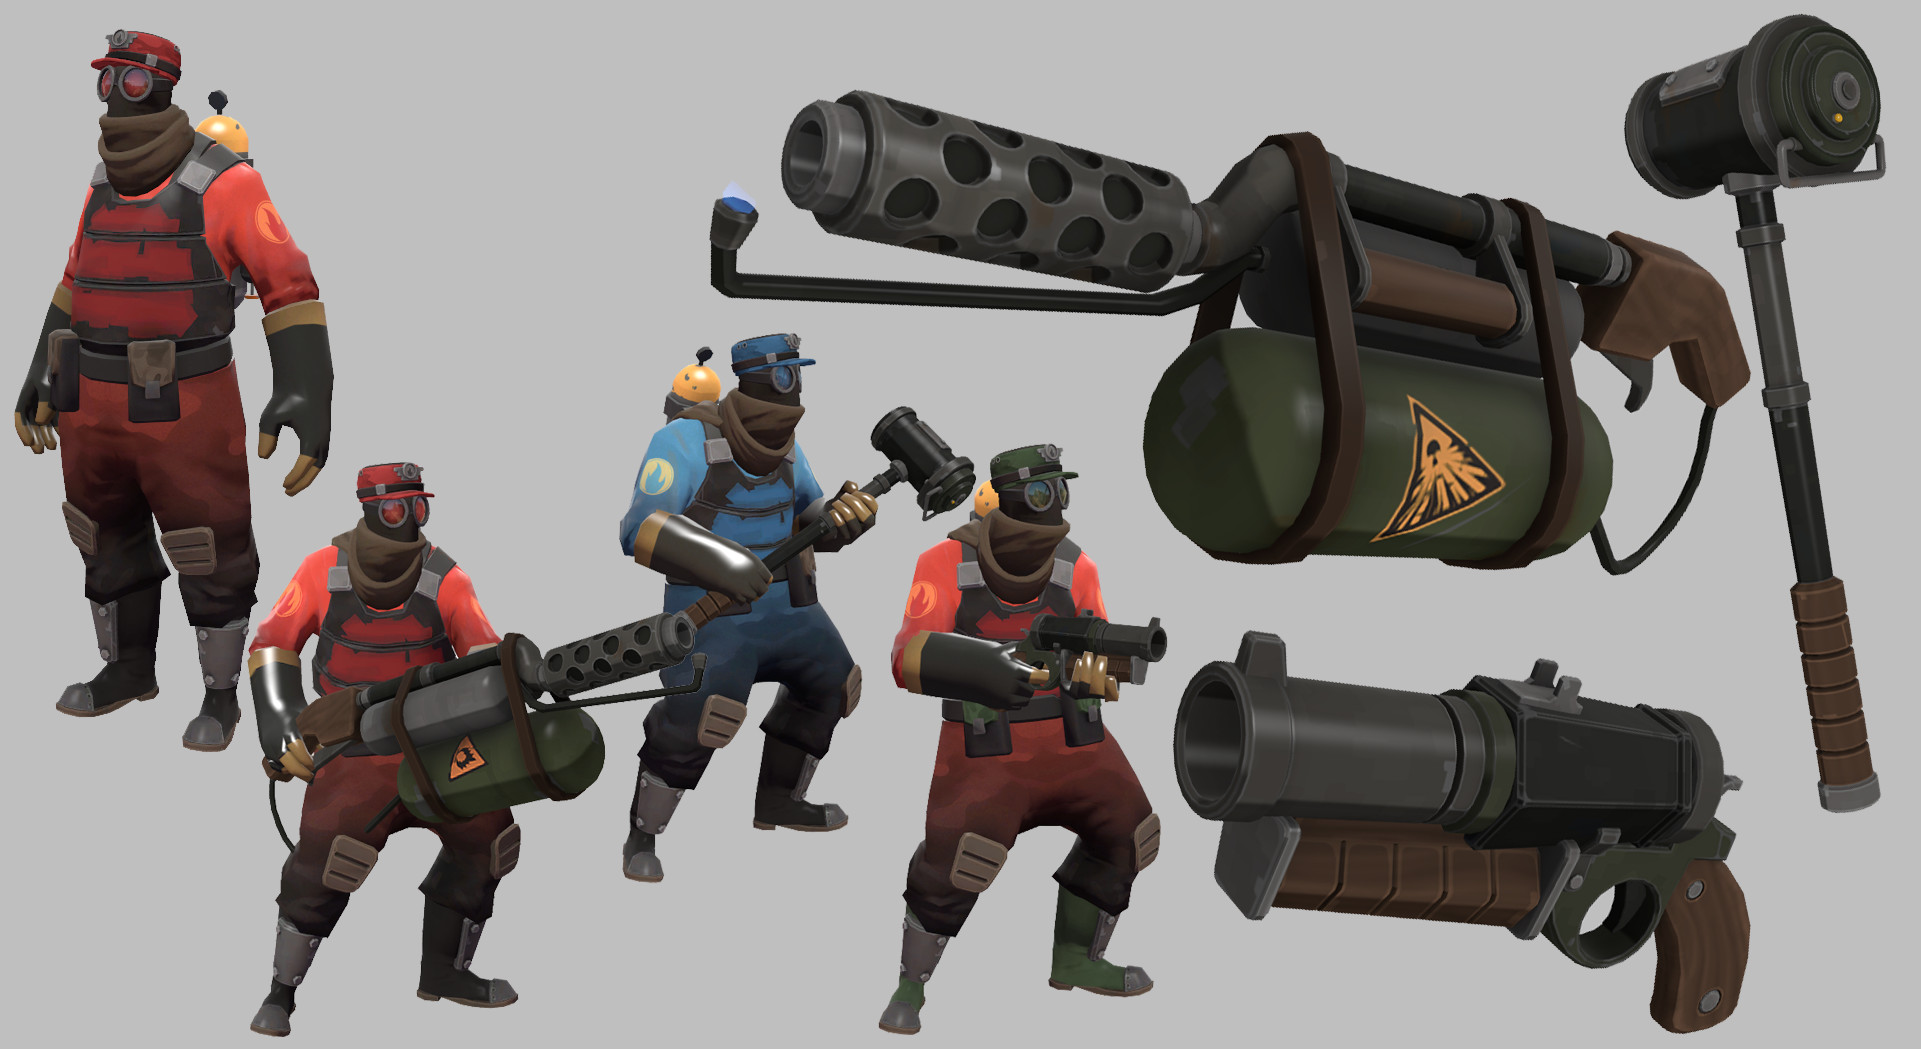 Desert/Military Pyro set, 4 cosmetics and 3 weapons